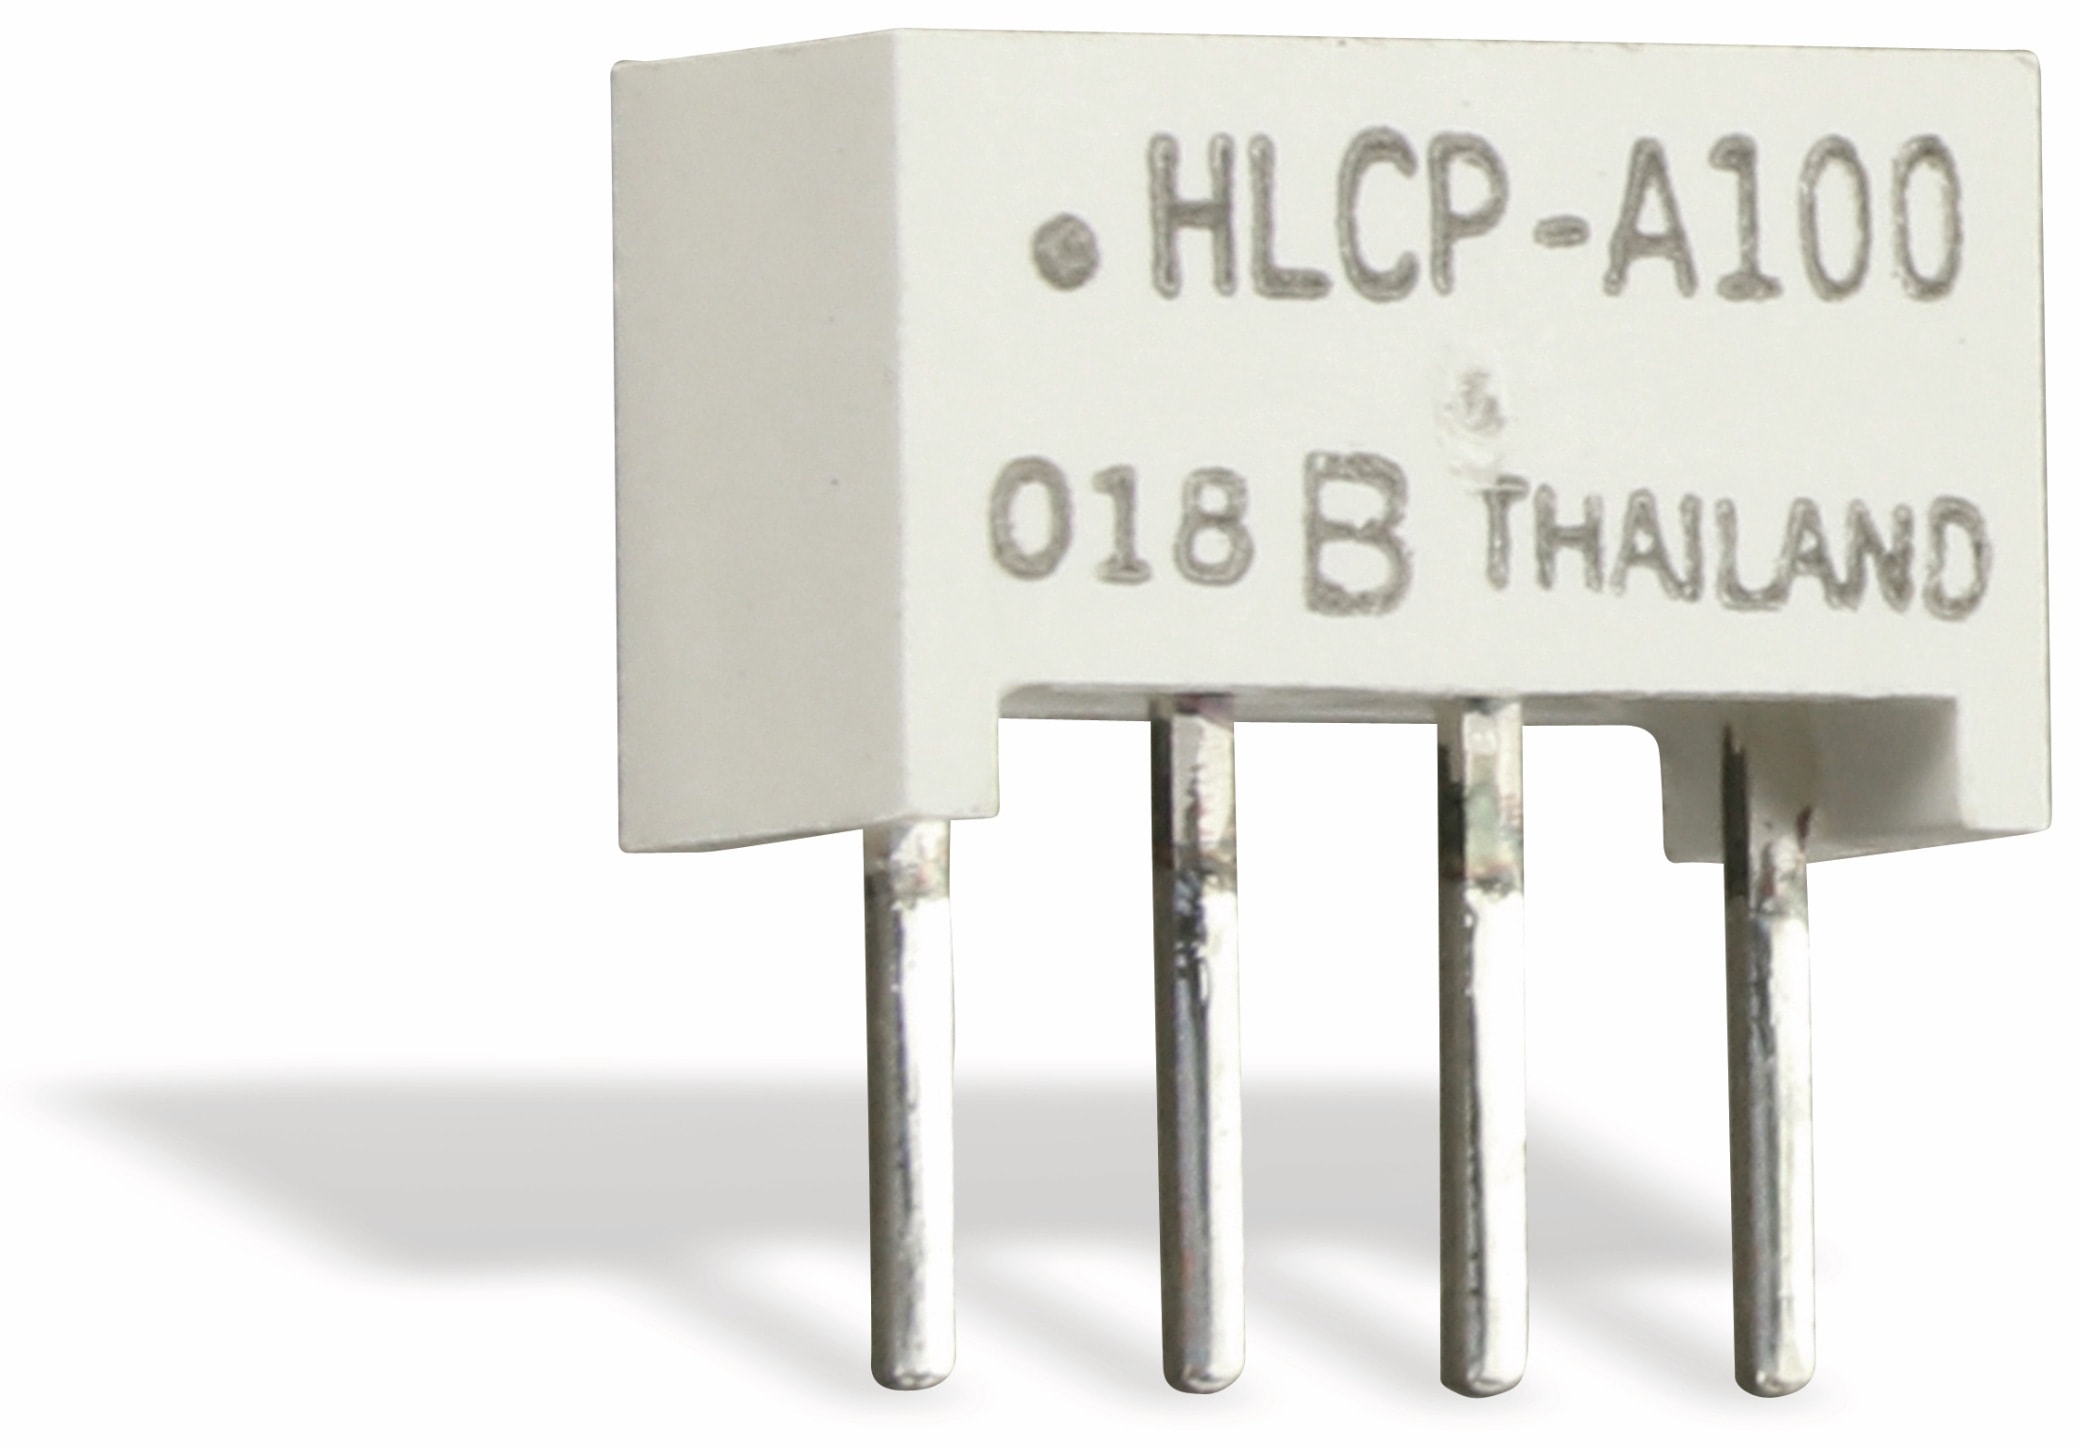 Flächen-LED HLCP-A100, 8,89x3,81 mm, rot